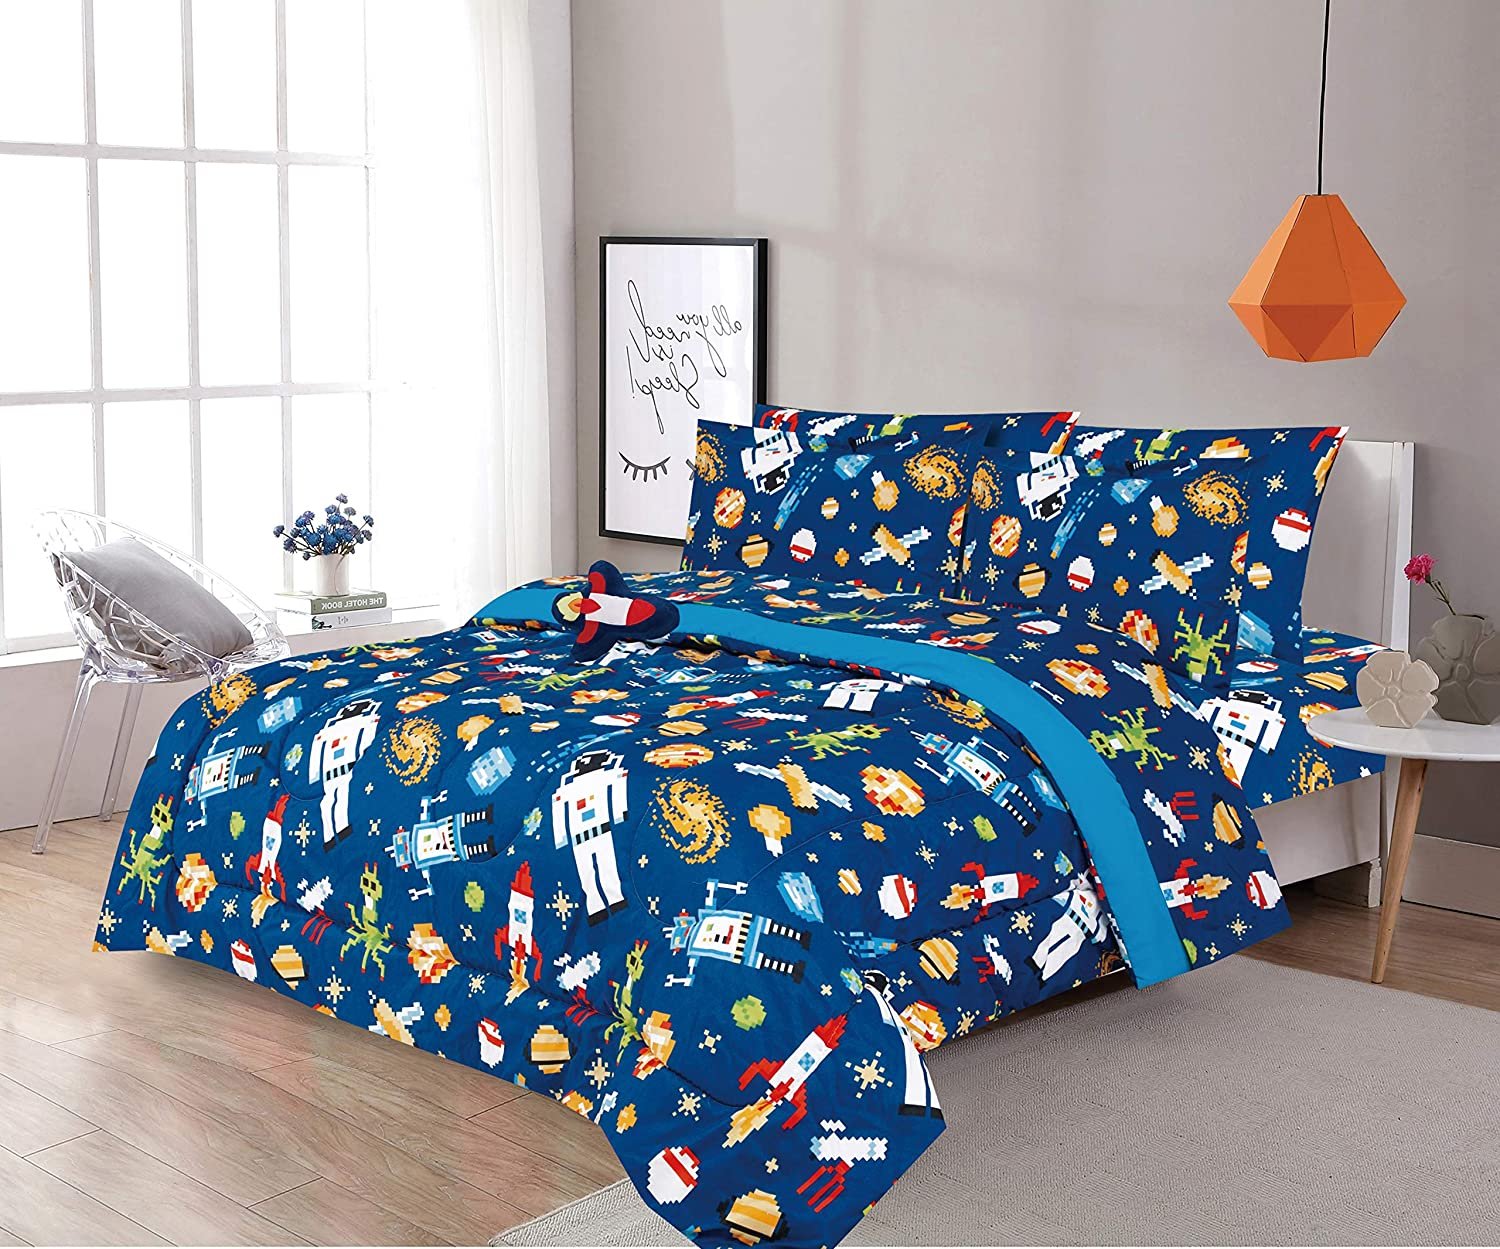 Sapphire Home 6 Piece Twin Size Boys Kids Teens Comforter Set Bed in Bag, Shams, Sheet Set & Decorative Toy Pillow, Kids Comforter Bedding w/Sheets, Astronaut Rocket Ship Space, Multicolor, 6pc Astro - image 1 of 4